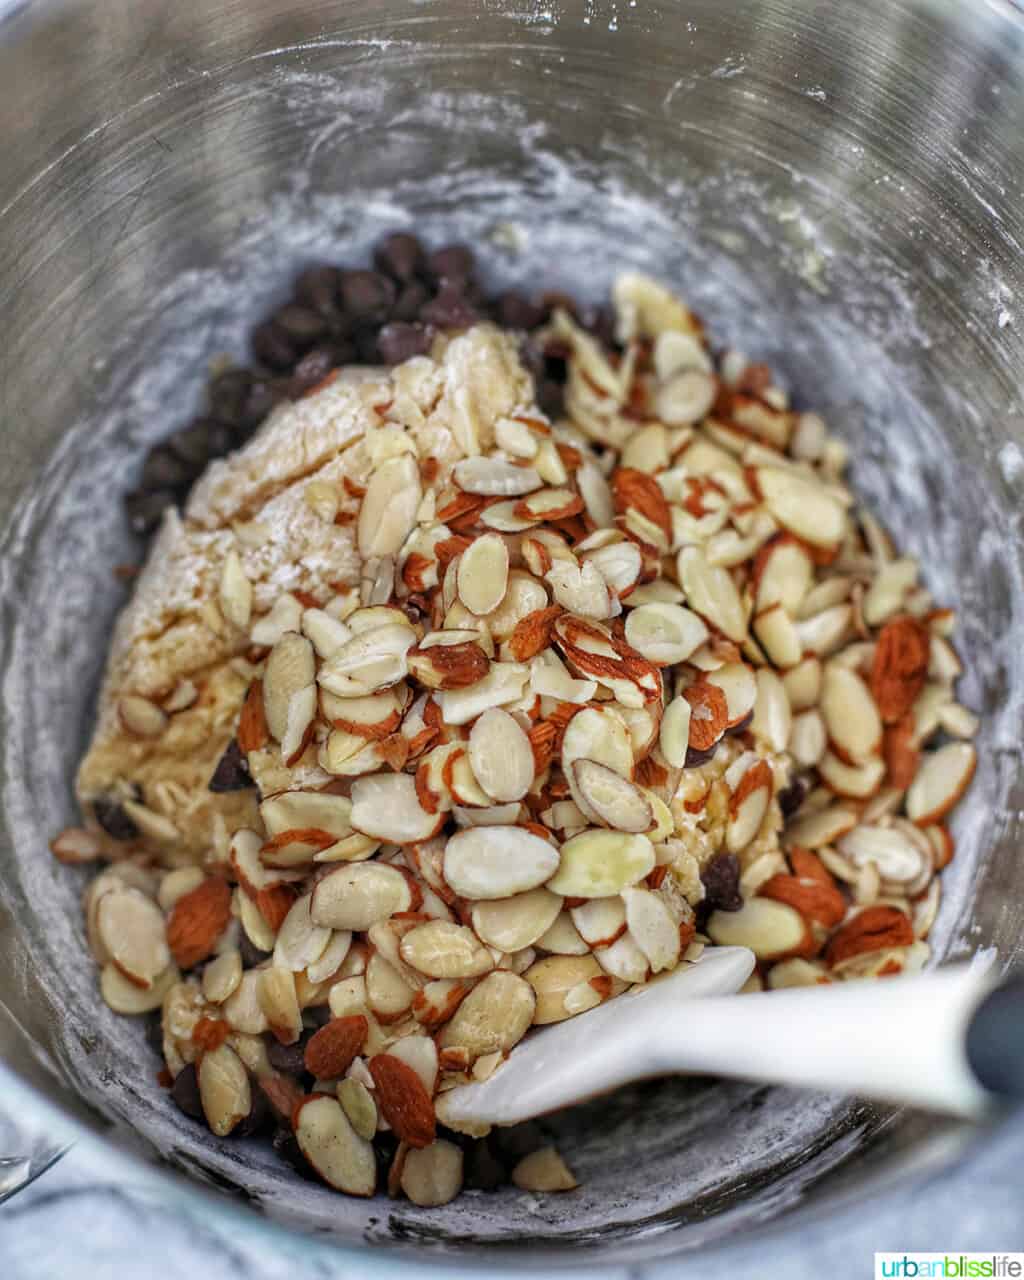 almonds into the batter for chocolate chip almond biscotti